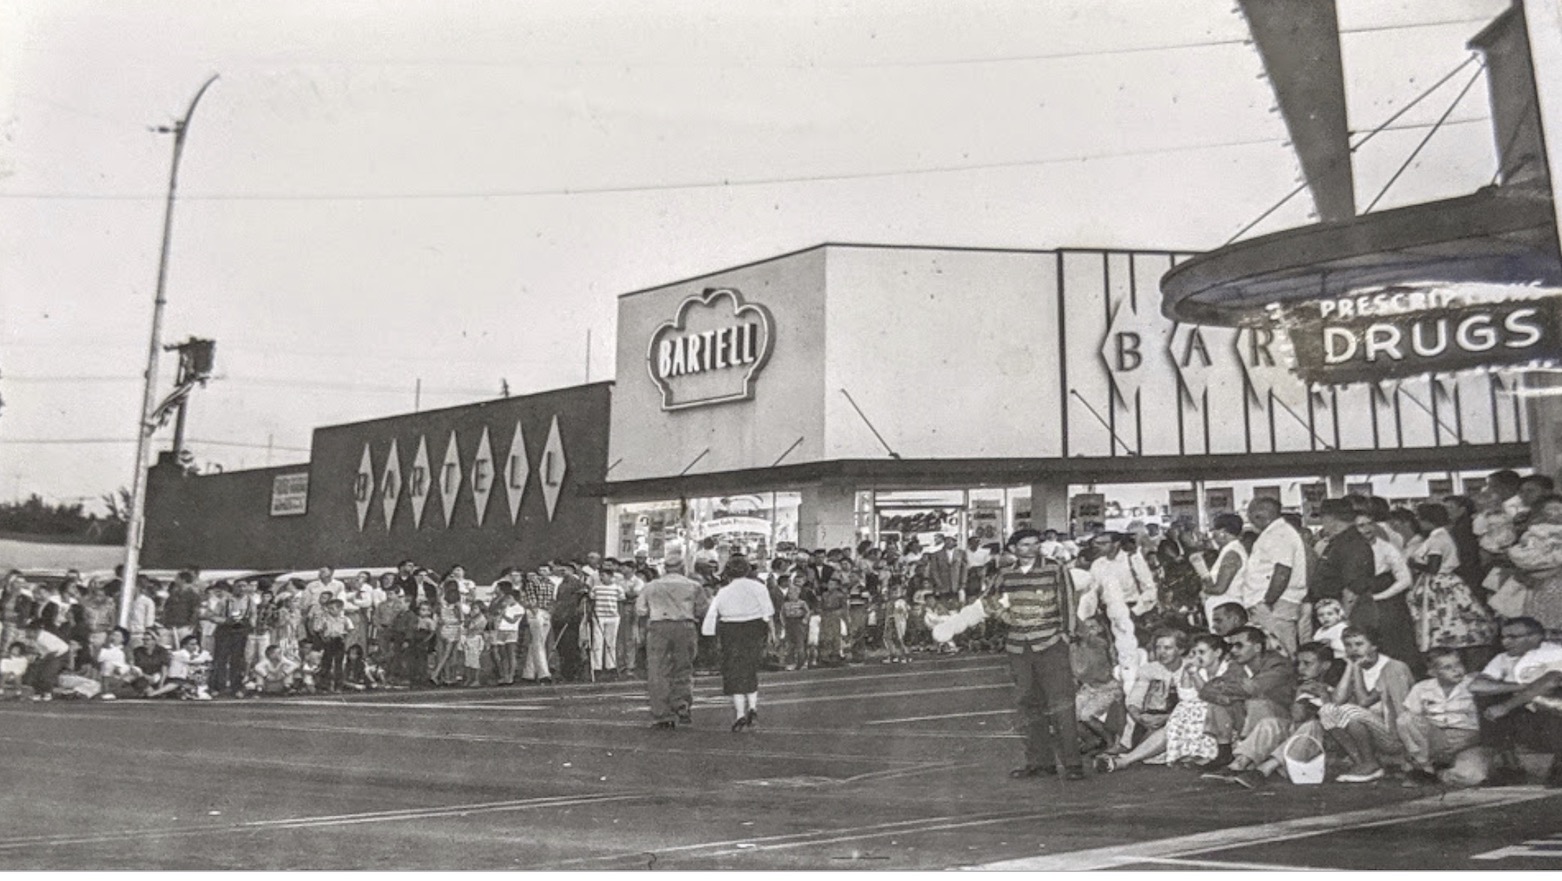 Bartell Replaced Tradewell: This picture is from 1958 showing Bartell Drugs that replaced the Tradewell store that had occupied the space previously.